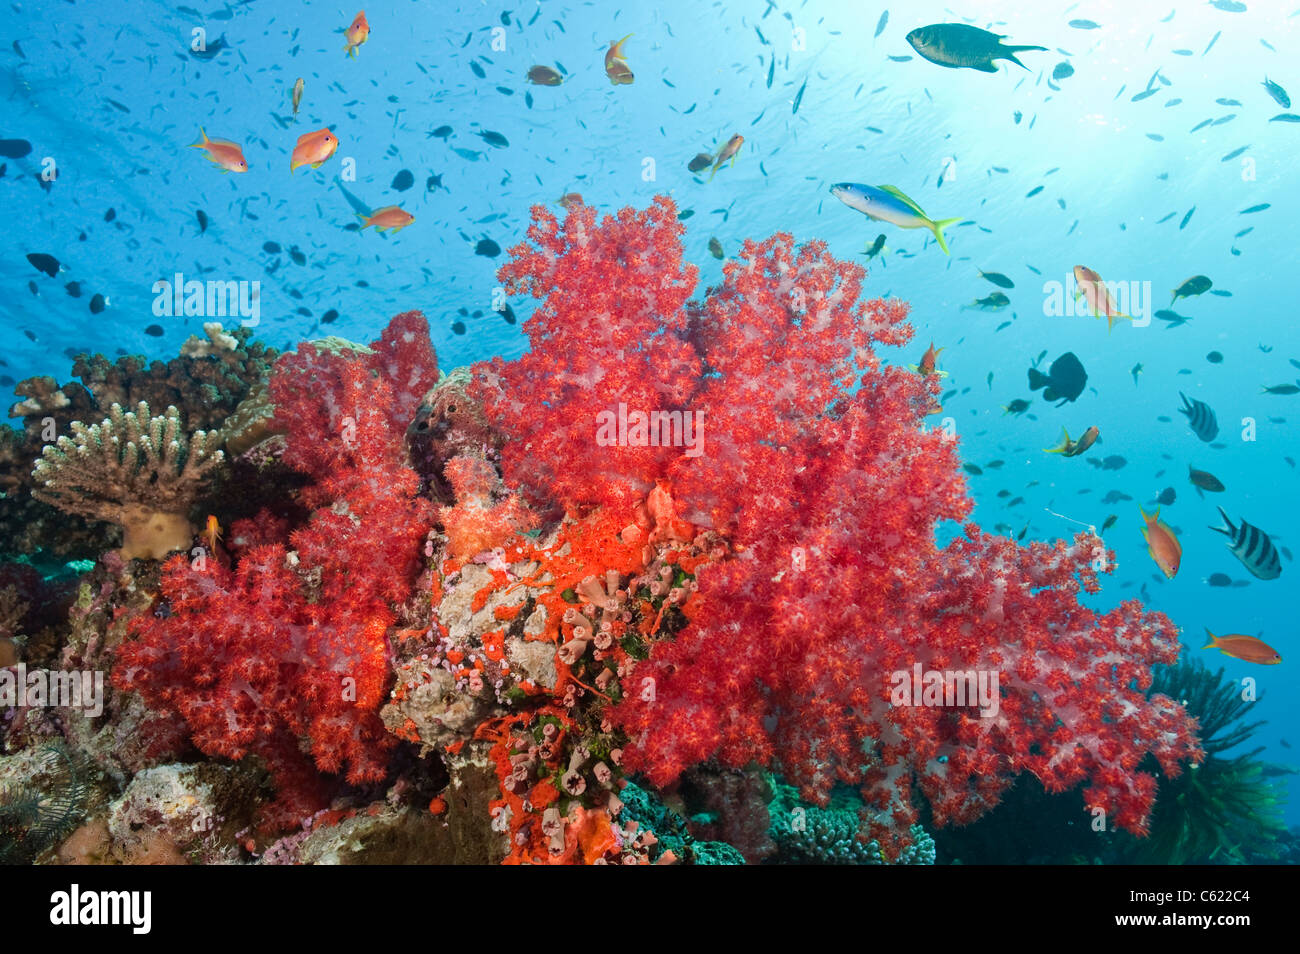 Coral reef in Beqa Lagoon, Pacific Harbor, Viti Levu, Fiji adorned with soft corals from the Dendronephthya family. Stock Photo